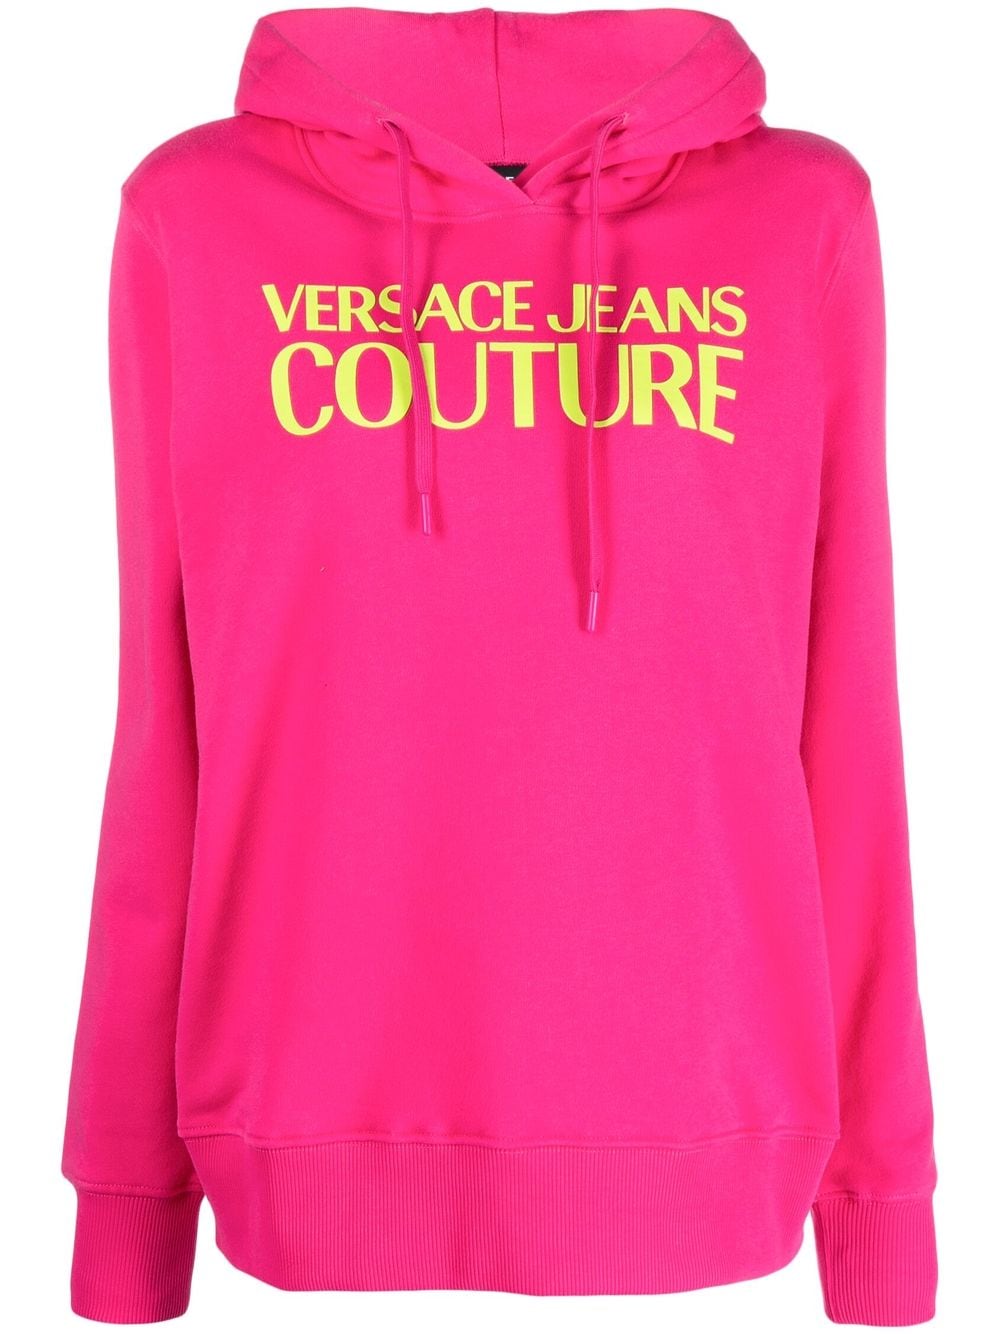 Versace Jeans Couture logo-print detail hoodie - Pink von Versace Jeans Couture